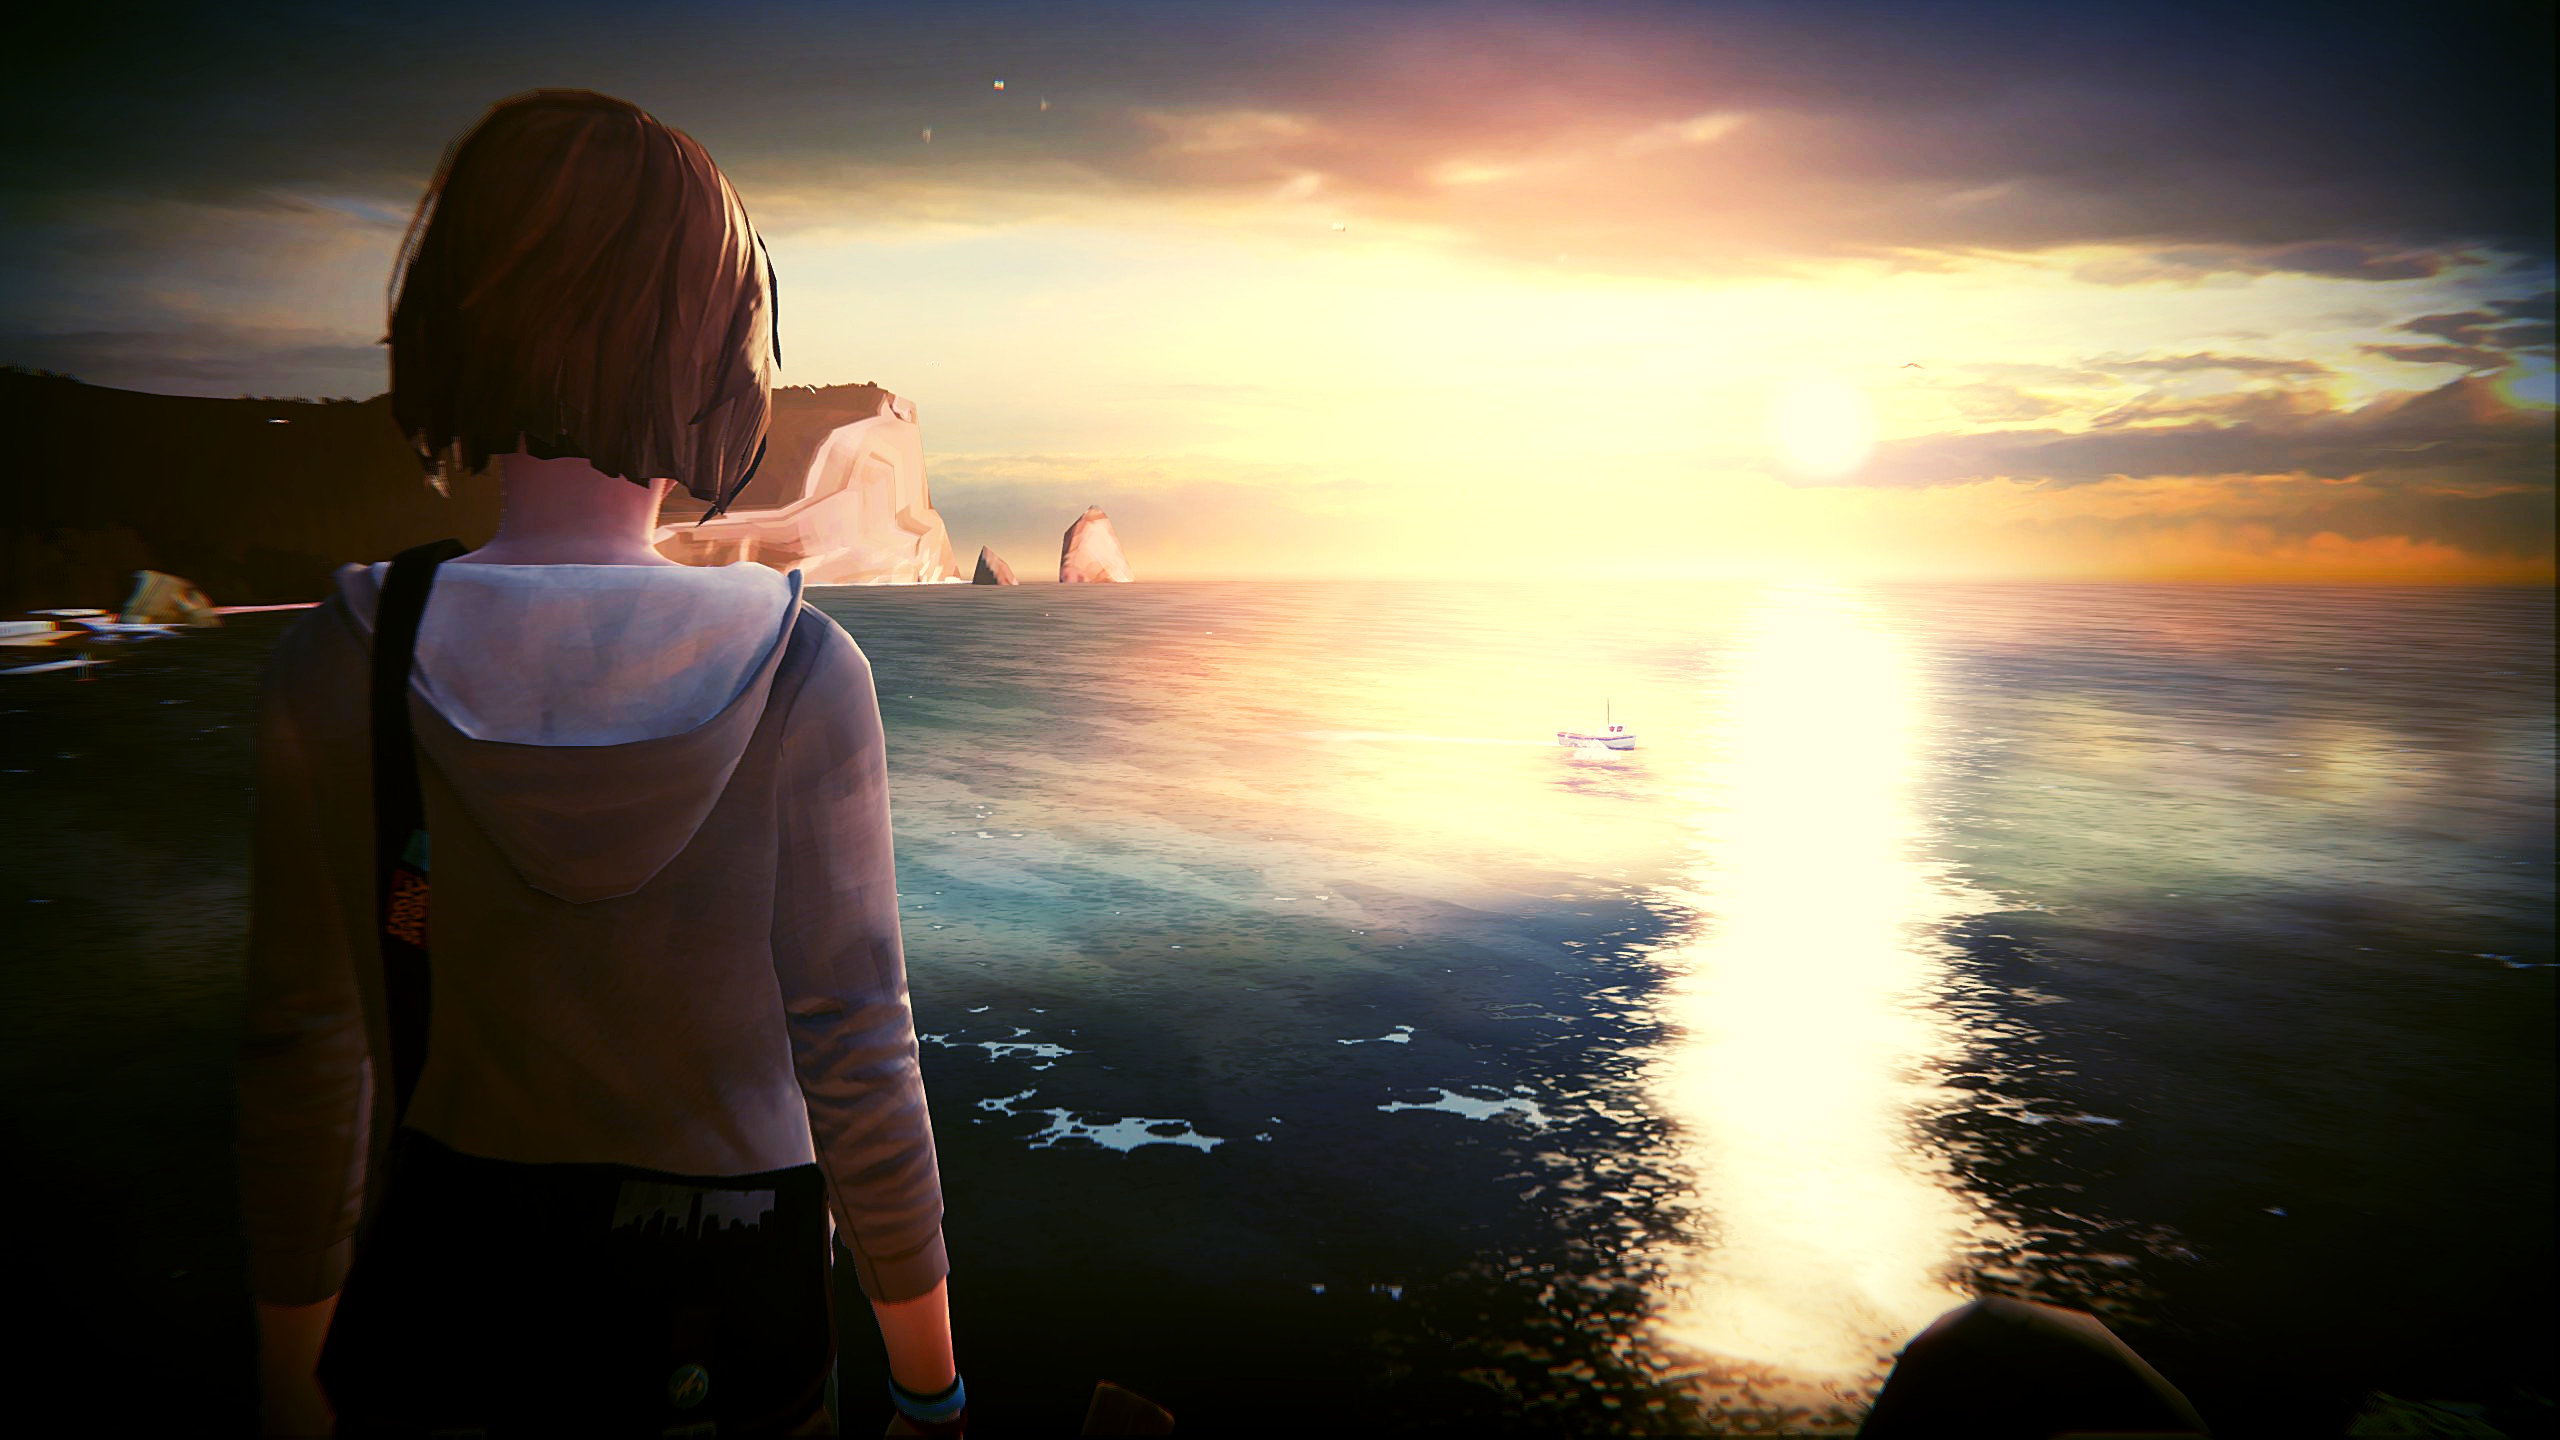 New Life Is Strange Wallpaper Full HD Pictures